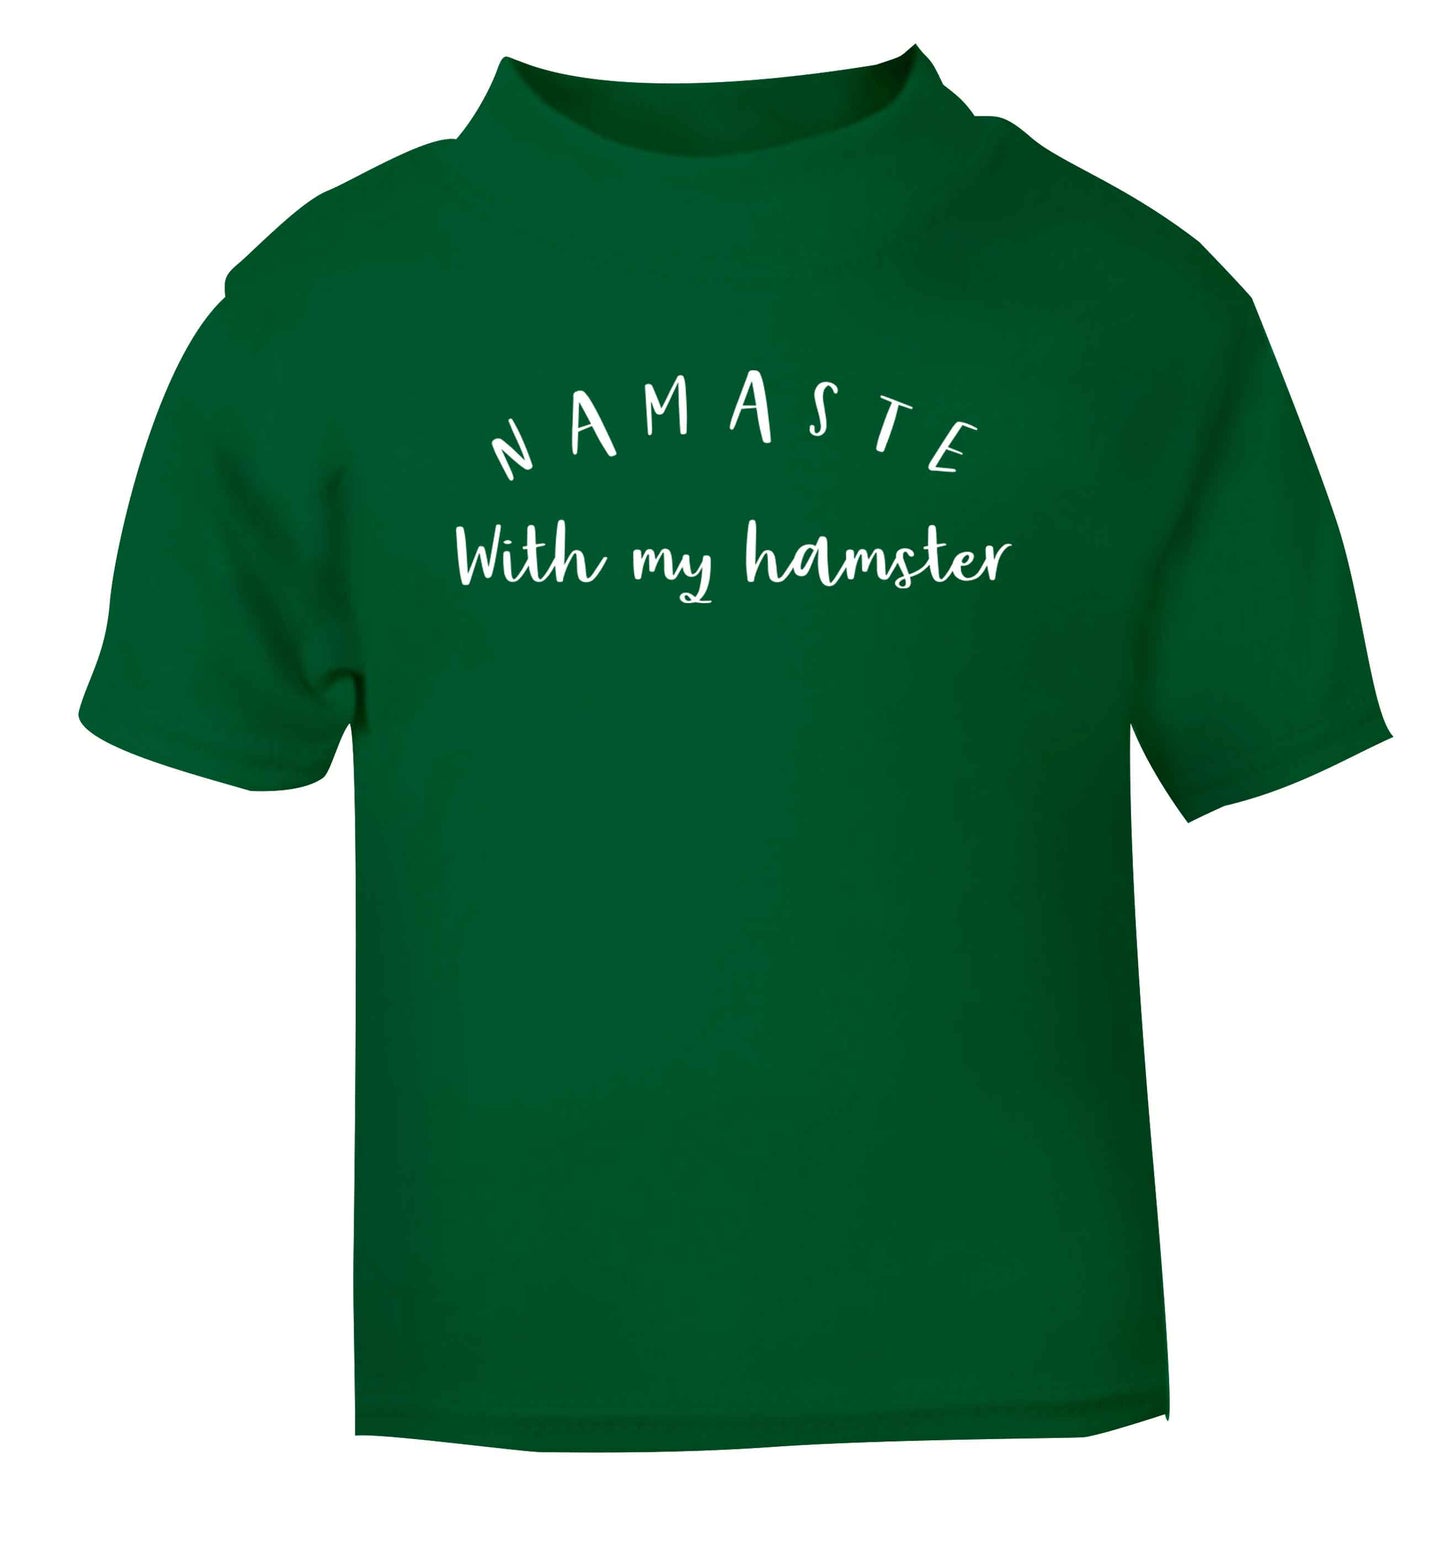 Namaste with my hamster green Baby Toddler Tshirt 2 Years